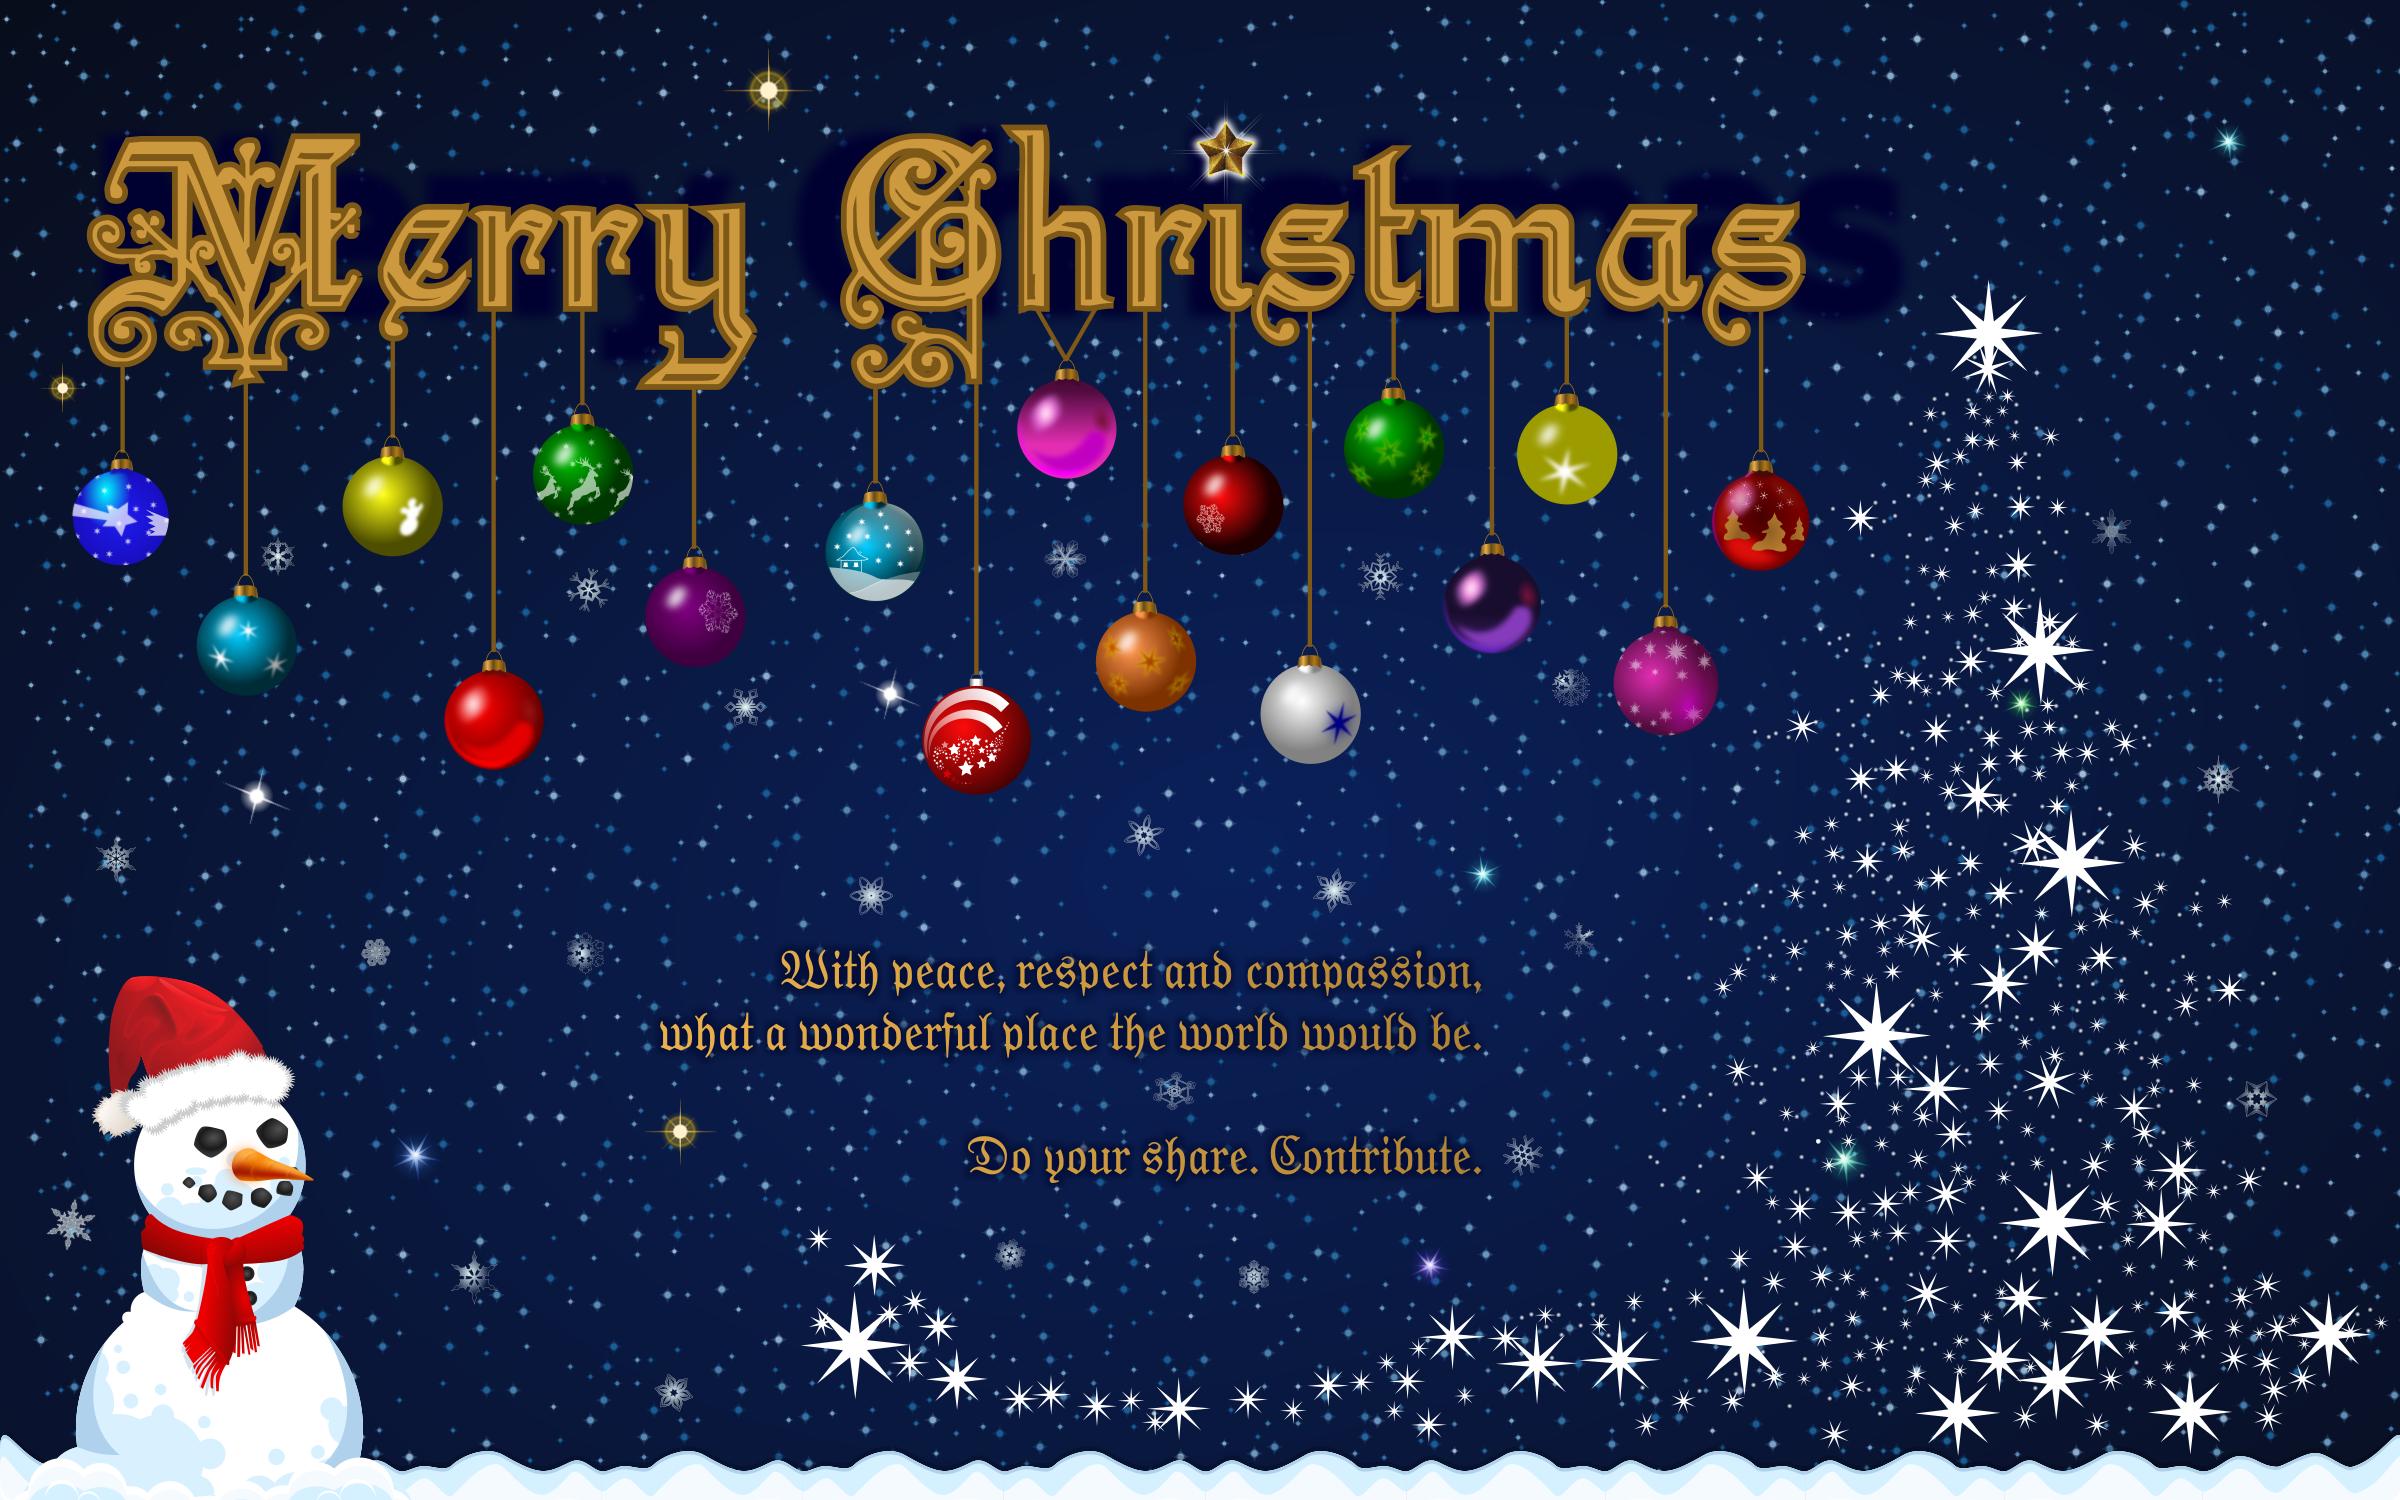 Merry Christmas wallpaper Icon PNG PNG and Icon Downloads